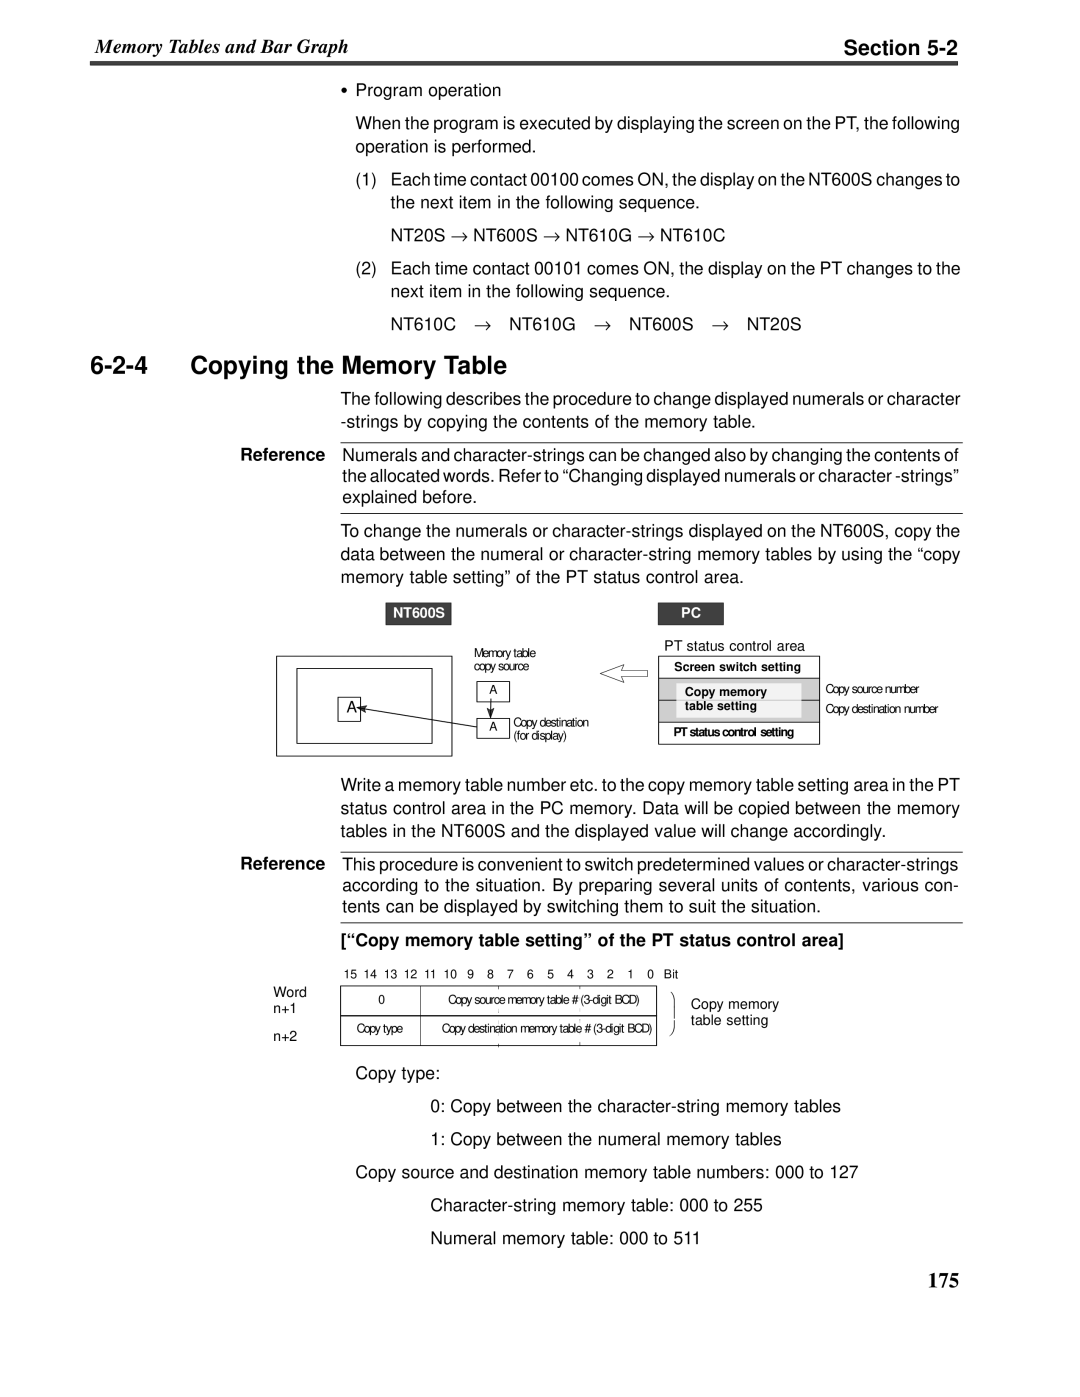 Omron V022-E3-1 operation manual 6-2-4Copying the Memory Table, Section, Reference 